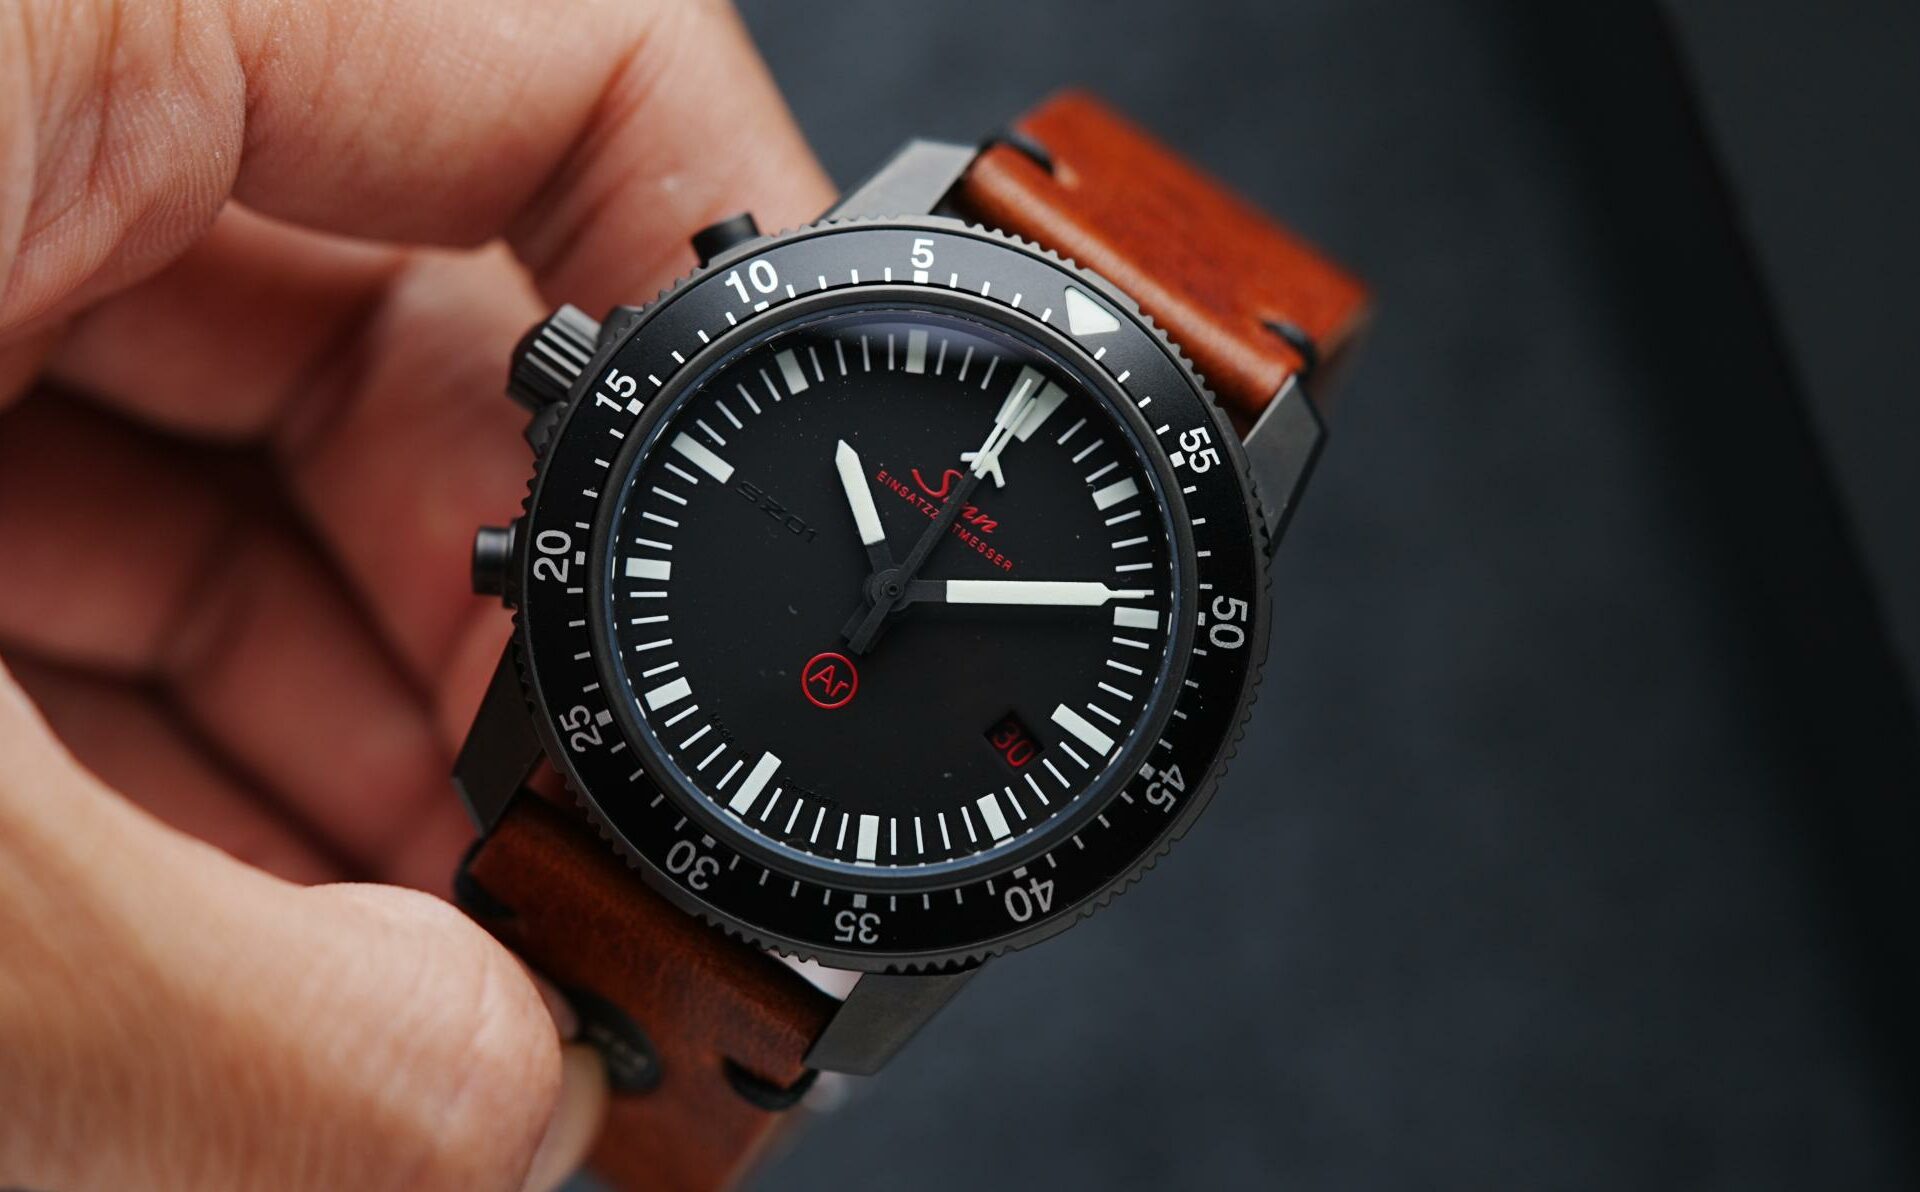 Sinn EZM 1.1S Limited Edition 500 being held in hand.